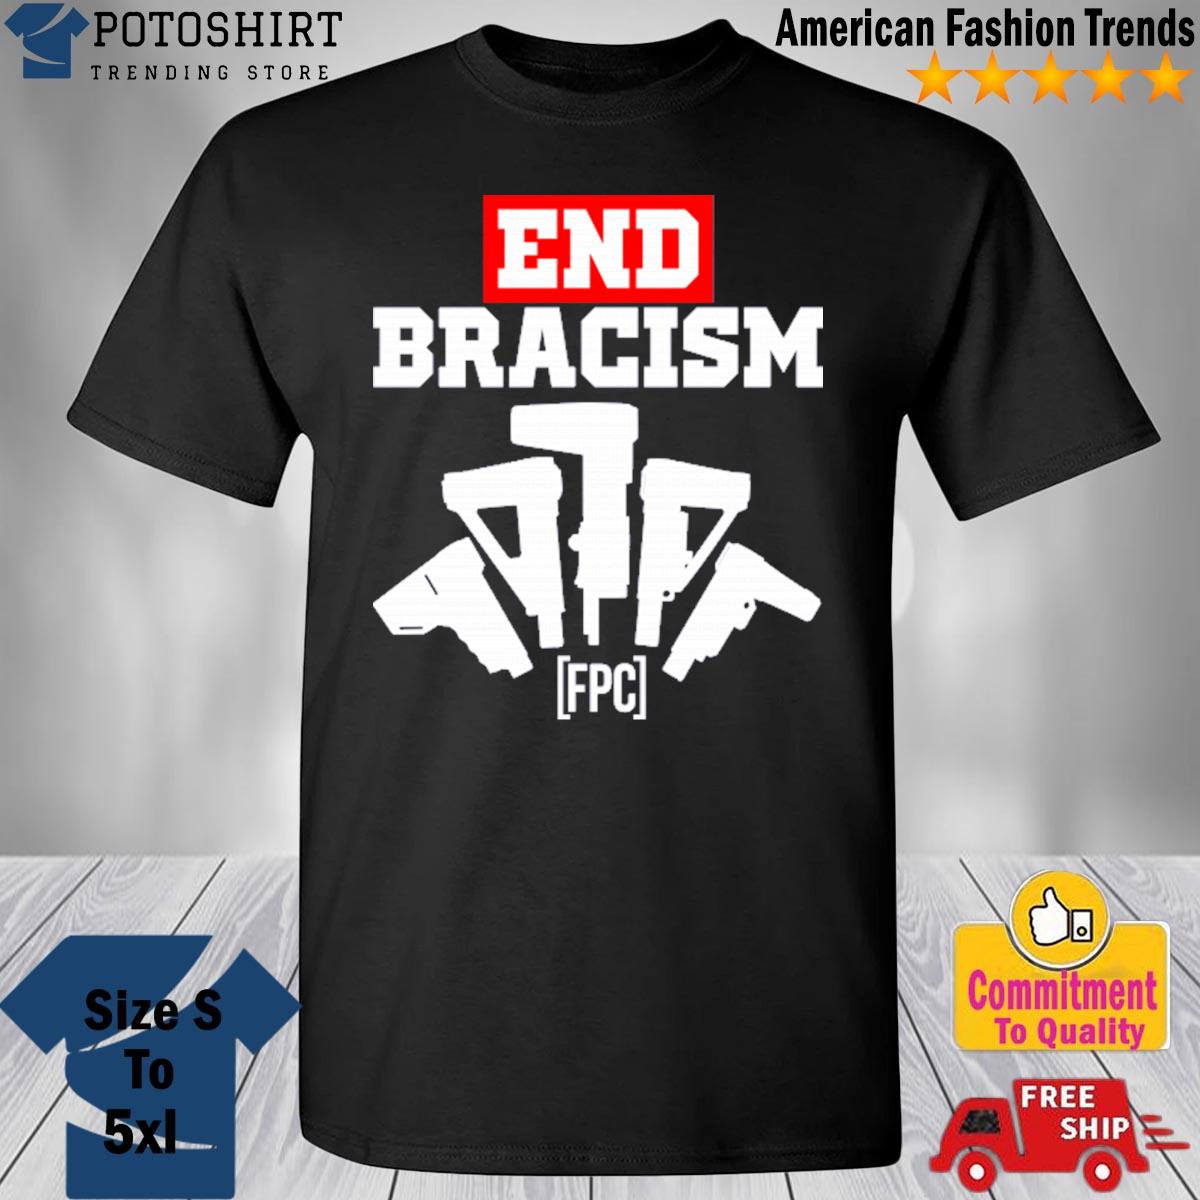 Firearms Policy Coalition Store Merch End Bracism Tee Shirt